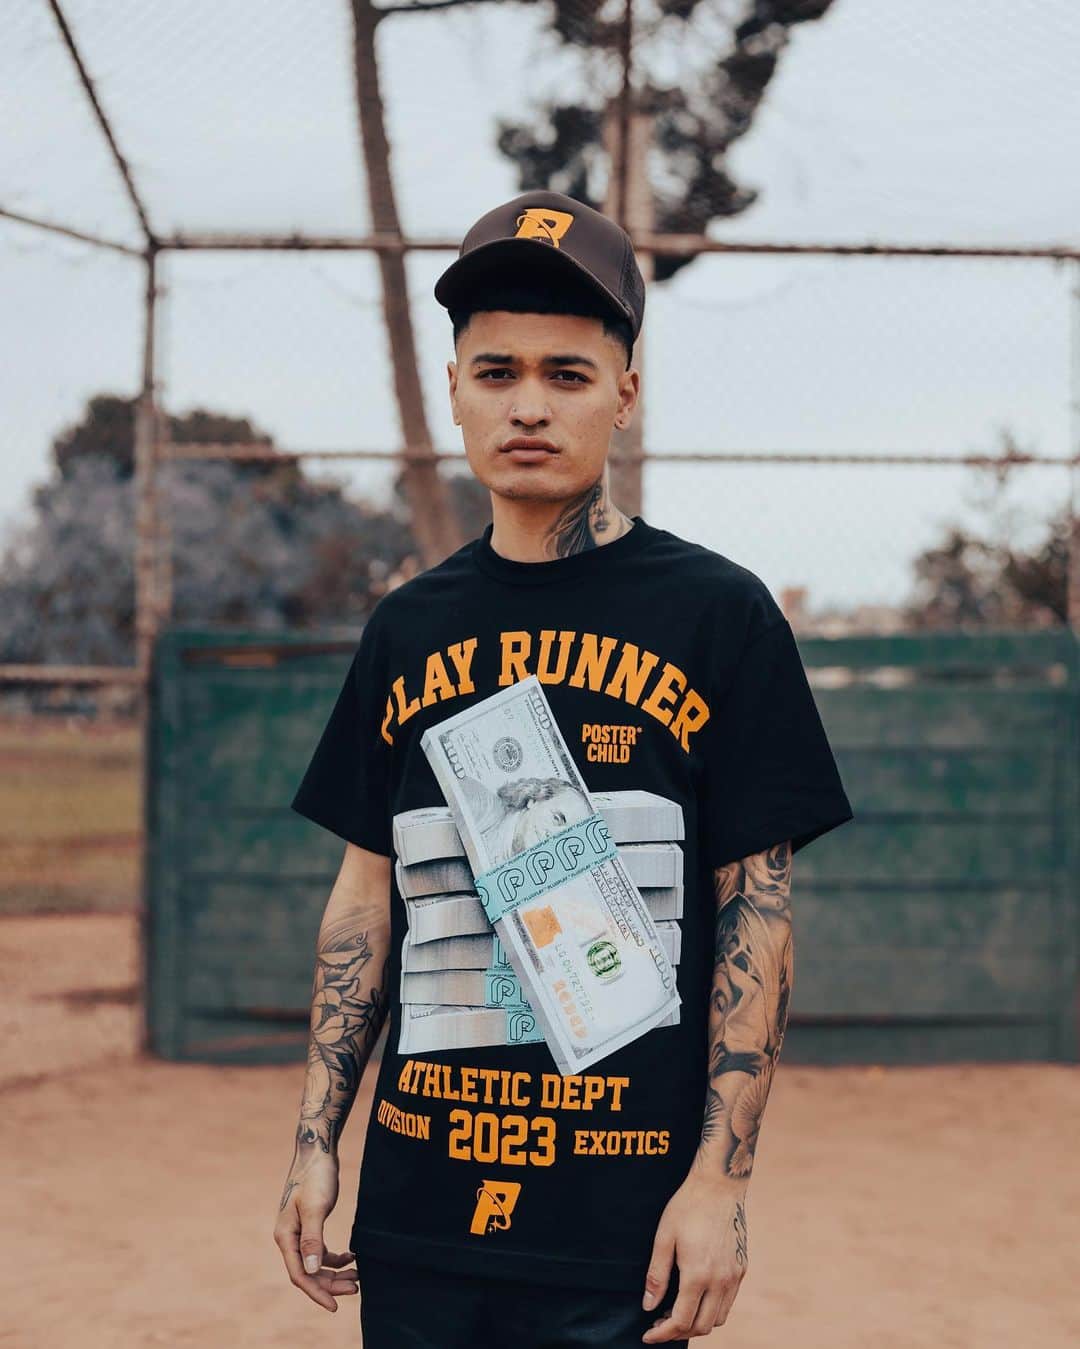 zumiezのインスタグラム：「‘PLAY RUNNER’ Tee By @posterchild.la x @plugplay Exclusively for Zumiez! Ft. @flexddup @phily_queso   From humbled beginnings running plays w the gang. Walked our path so that others can run w us💯 #playrunner   NOW AVAILABLE IN 50 ZUMIEZ STORES! Swipe ⬅️ for Store List / Contest Info  📸: @_shotbydavid_」